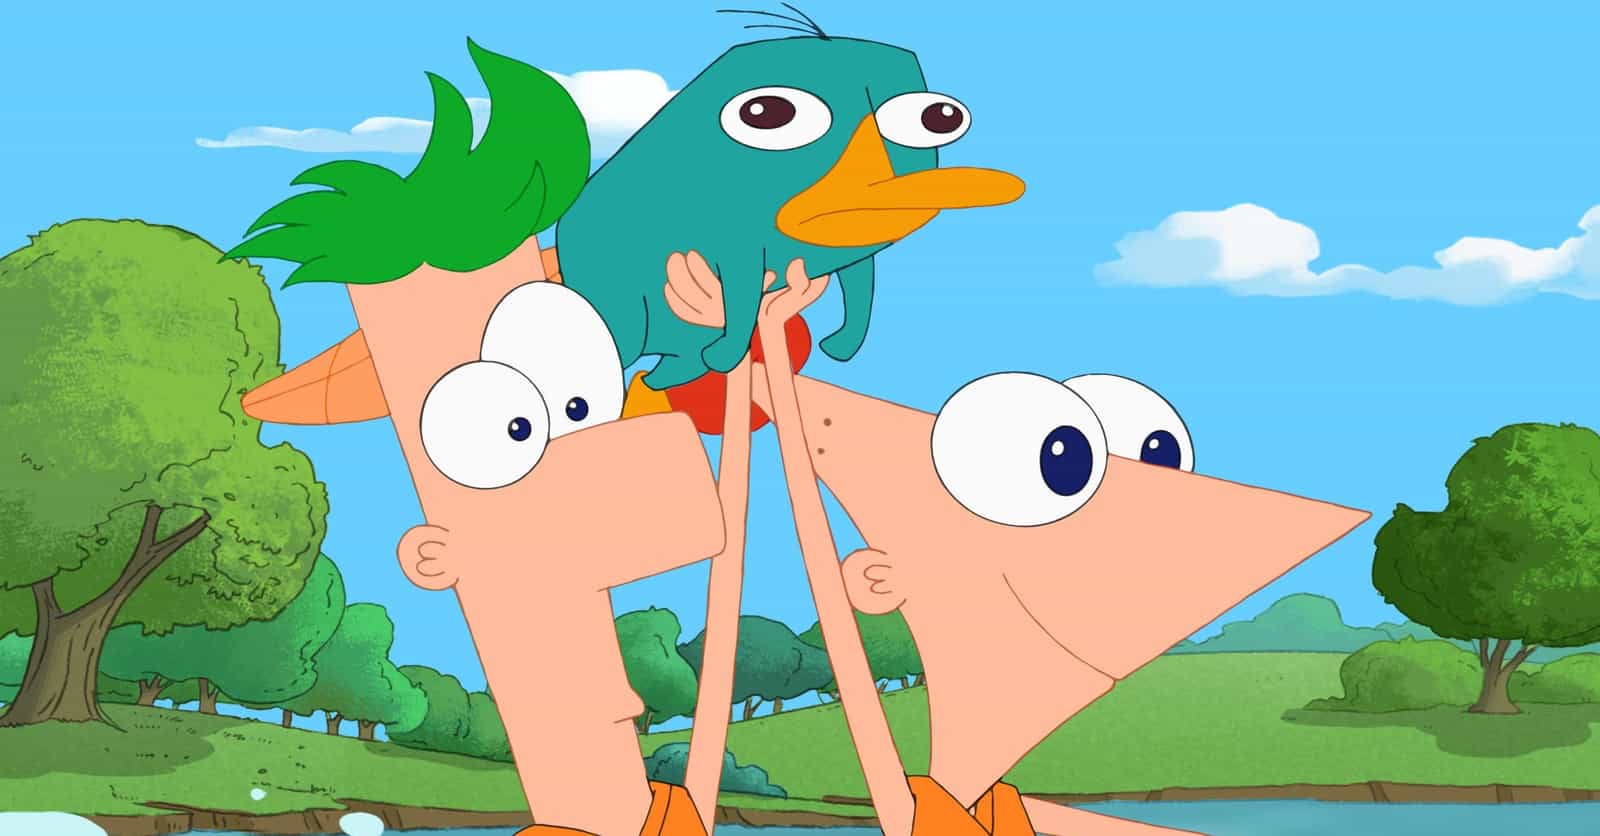 Hilarious Moments That Prove Perry The Platypus Was An Essential Part Of 'Phineas And Ferb'